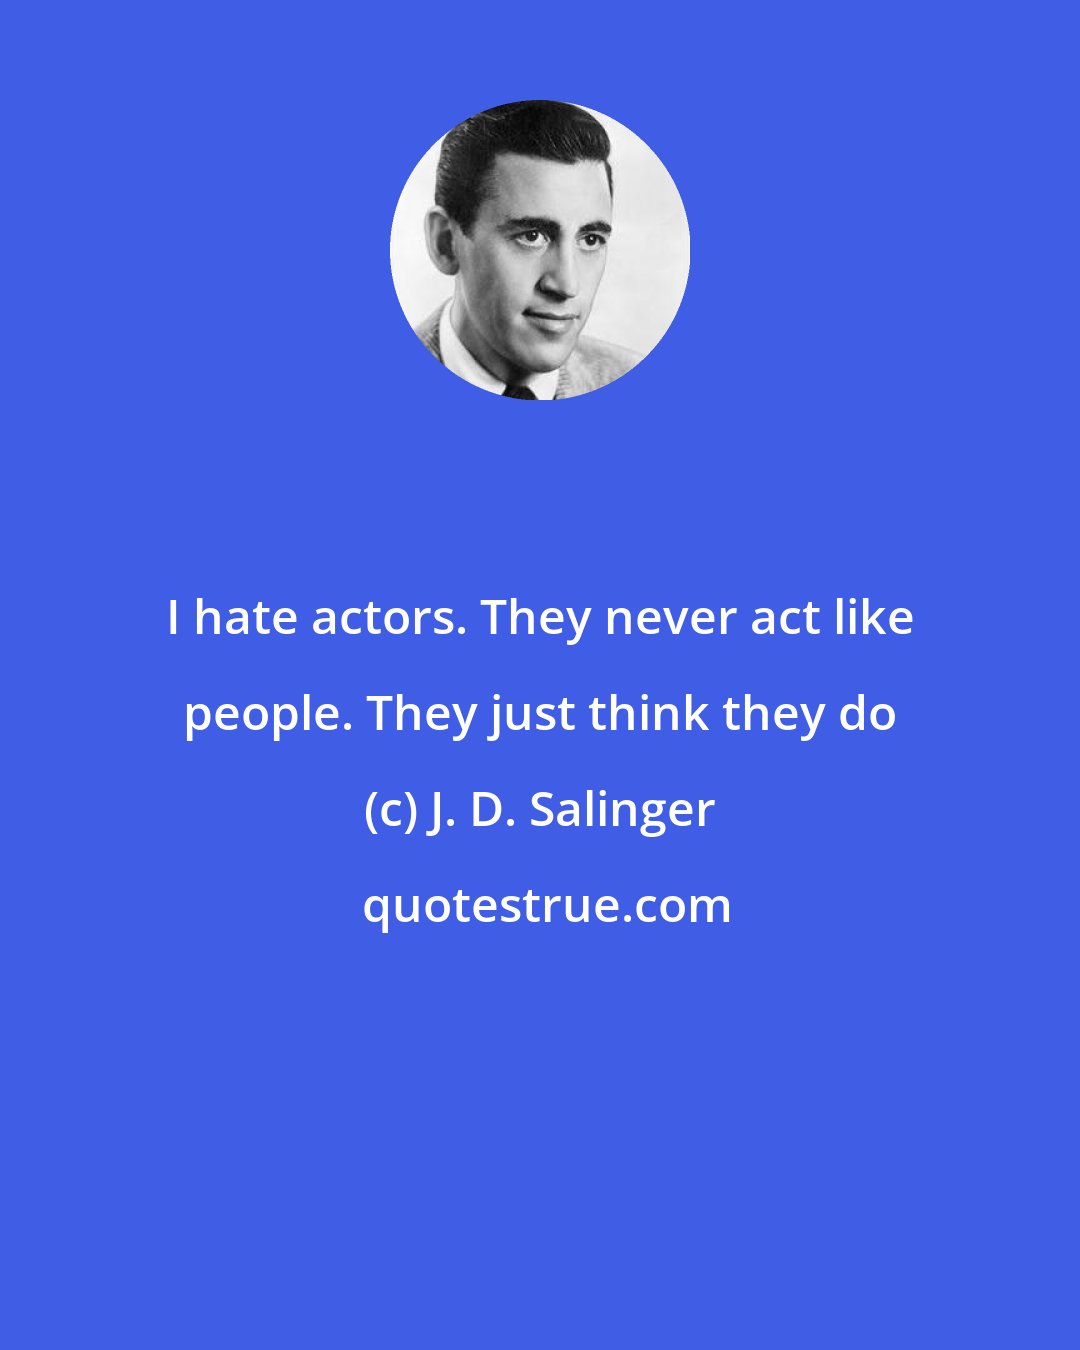 J. D. Salinger: I hate actors. They never act like people. They just think they do